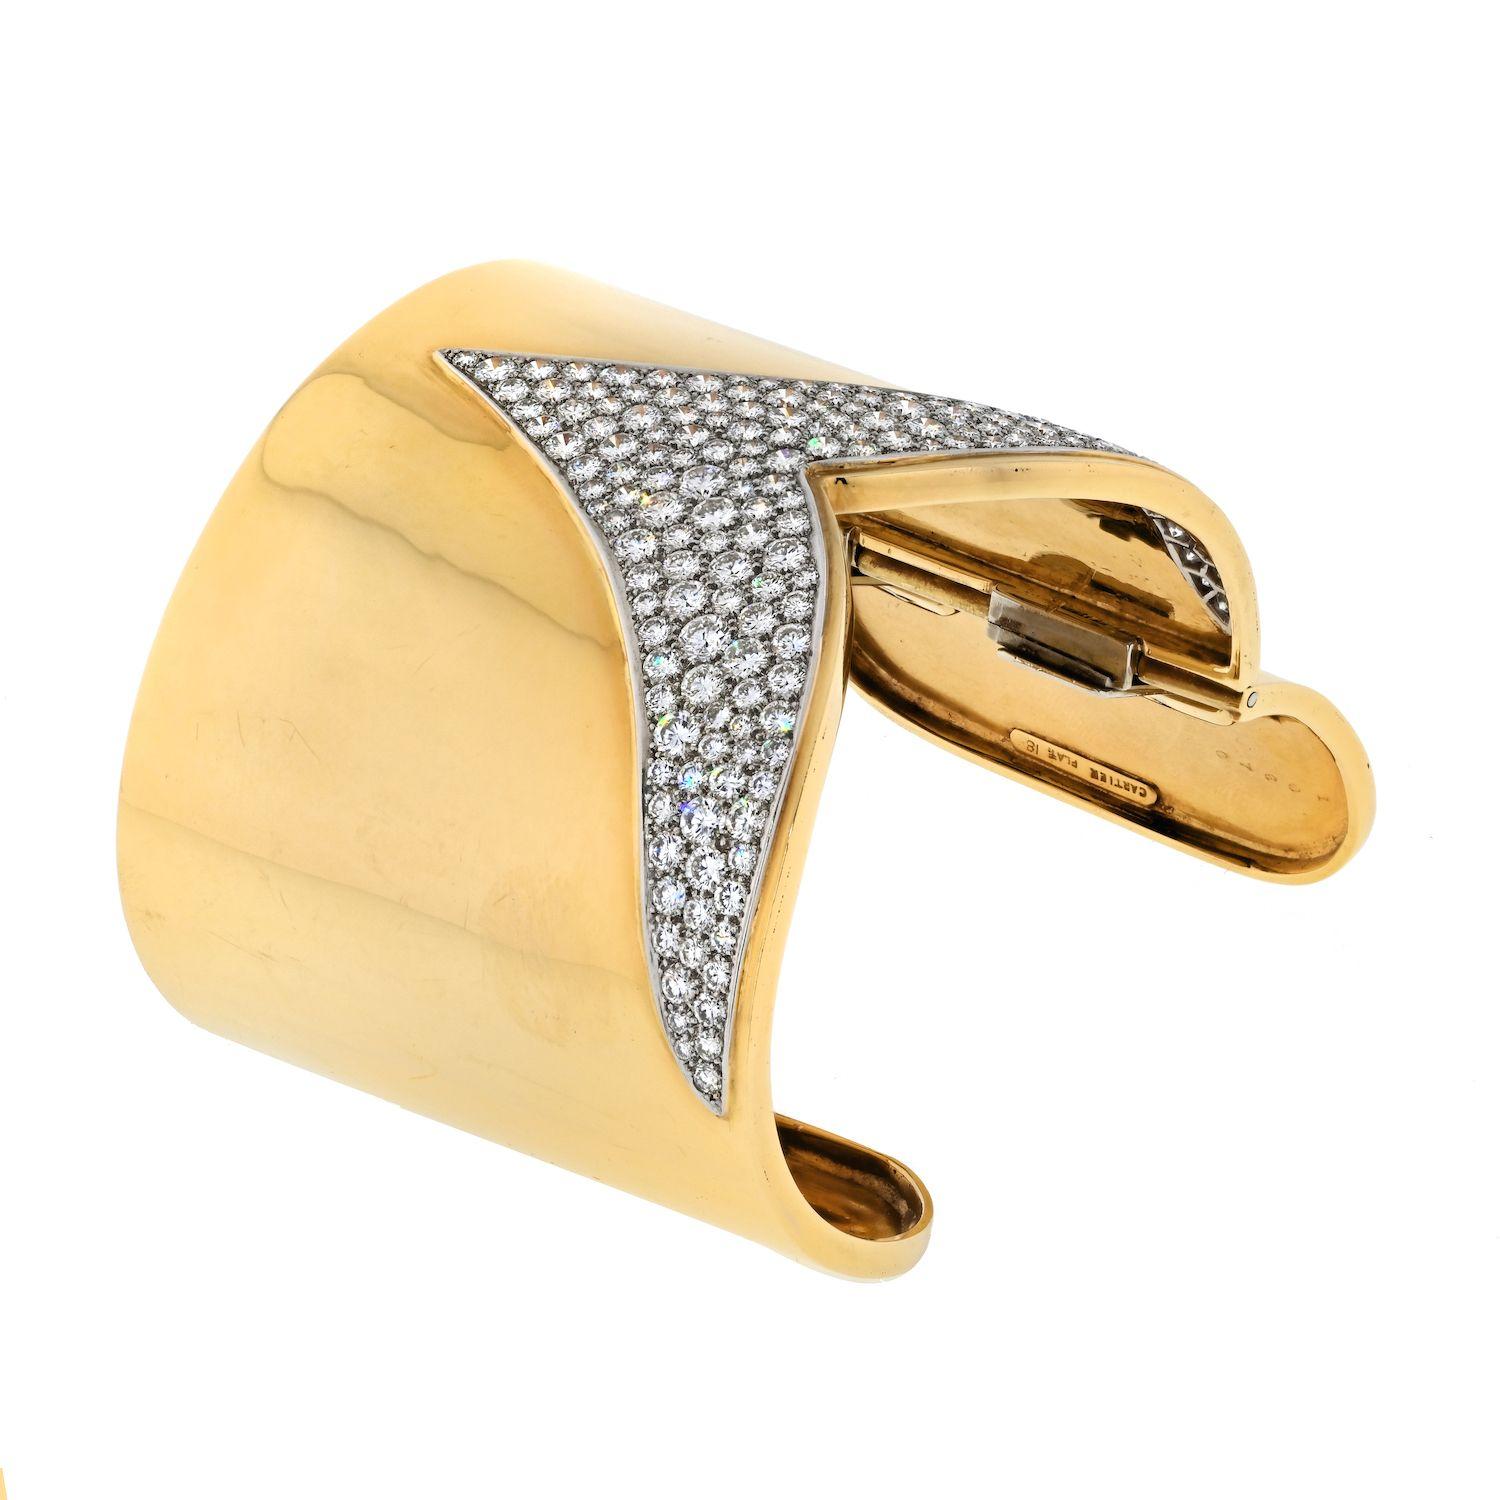 Behold the epitome of refinement and luxury with the Estate Cartier 18K Yellow Gold Diamond Cuff Bracelet, a masterpiece that seamlessly marries timeless elegance with unparalleled craftsmanship. Crafted with meticulous attention to detail, this